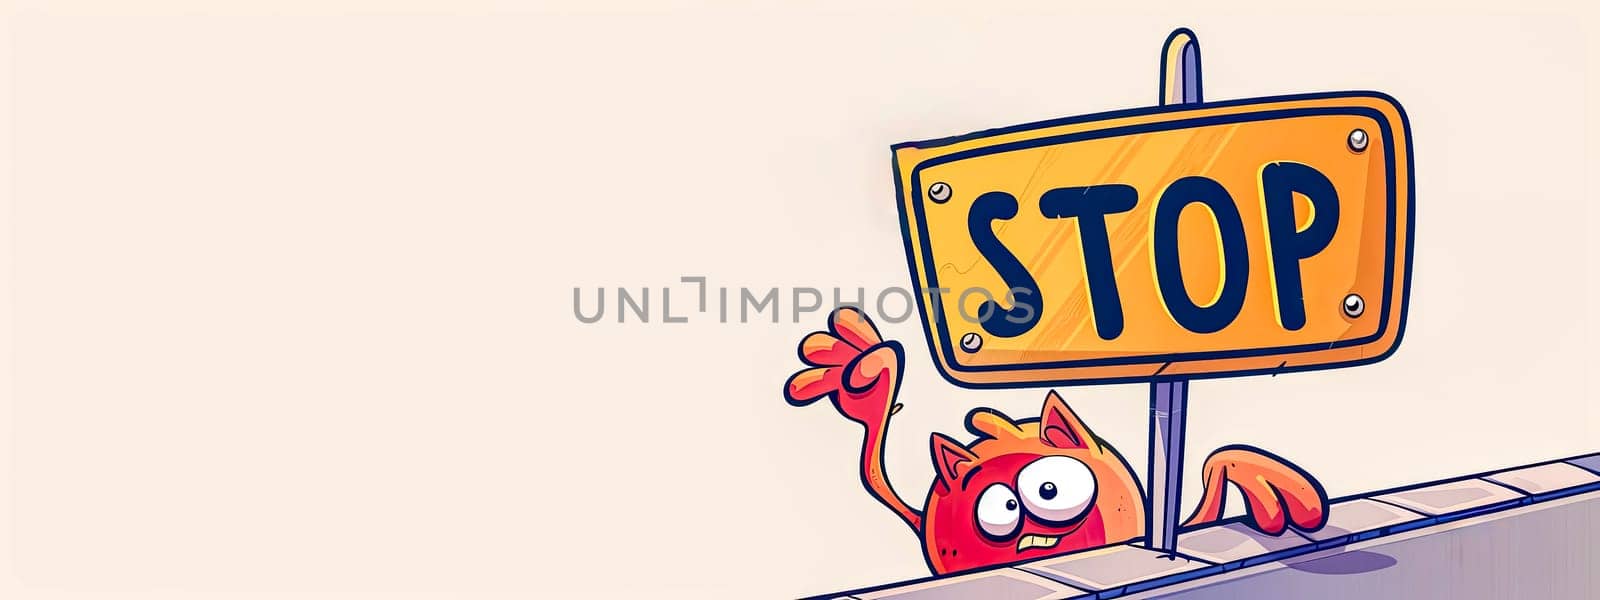 Cute monster holding a stop sign cartoon illustration, copy space by Edophoto